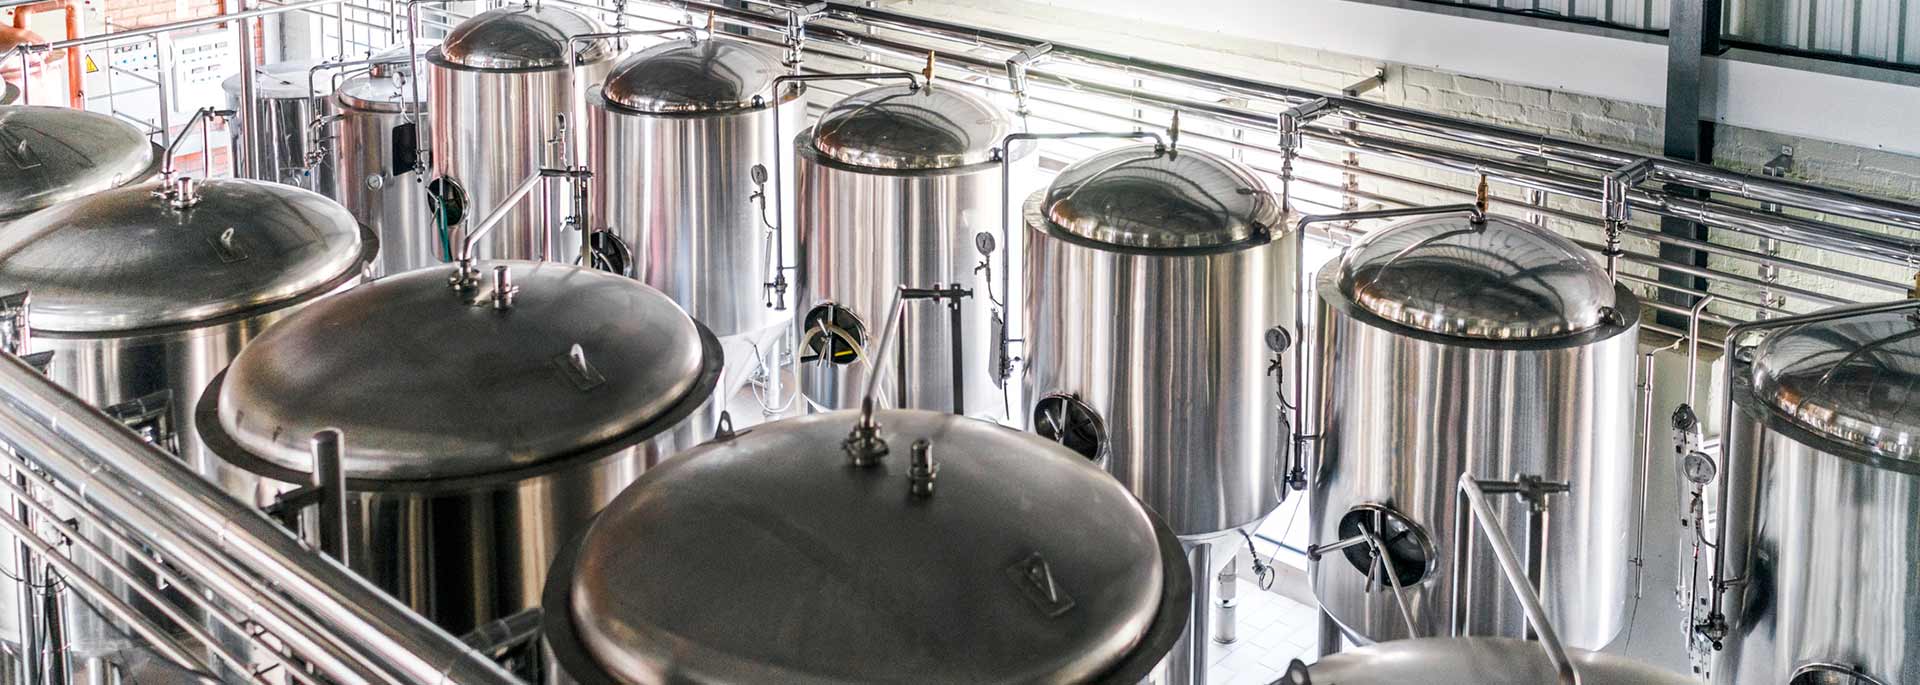 High angle view of metallic vats in a brewery.